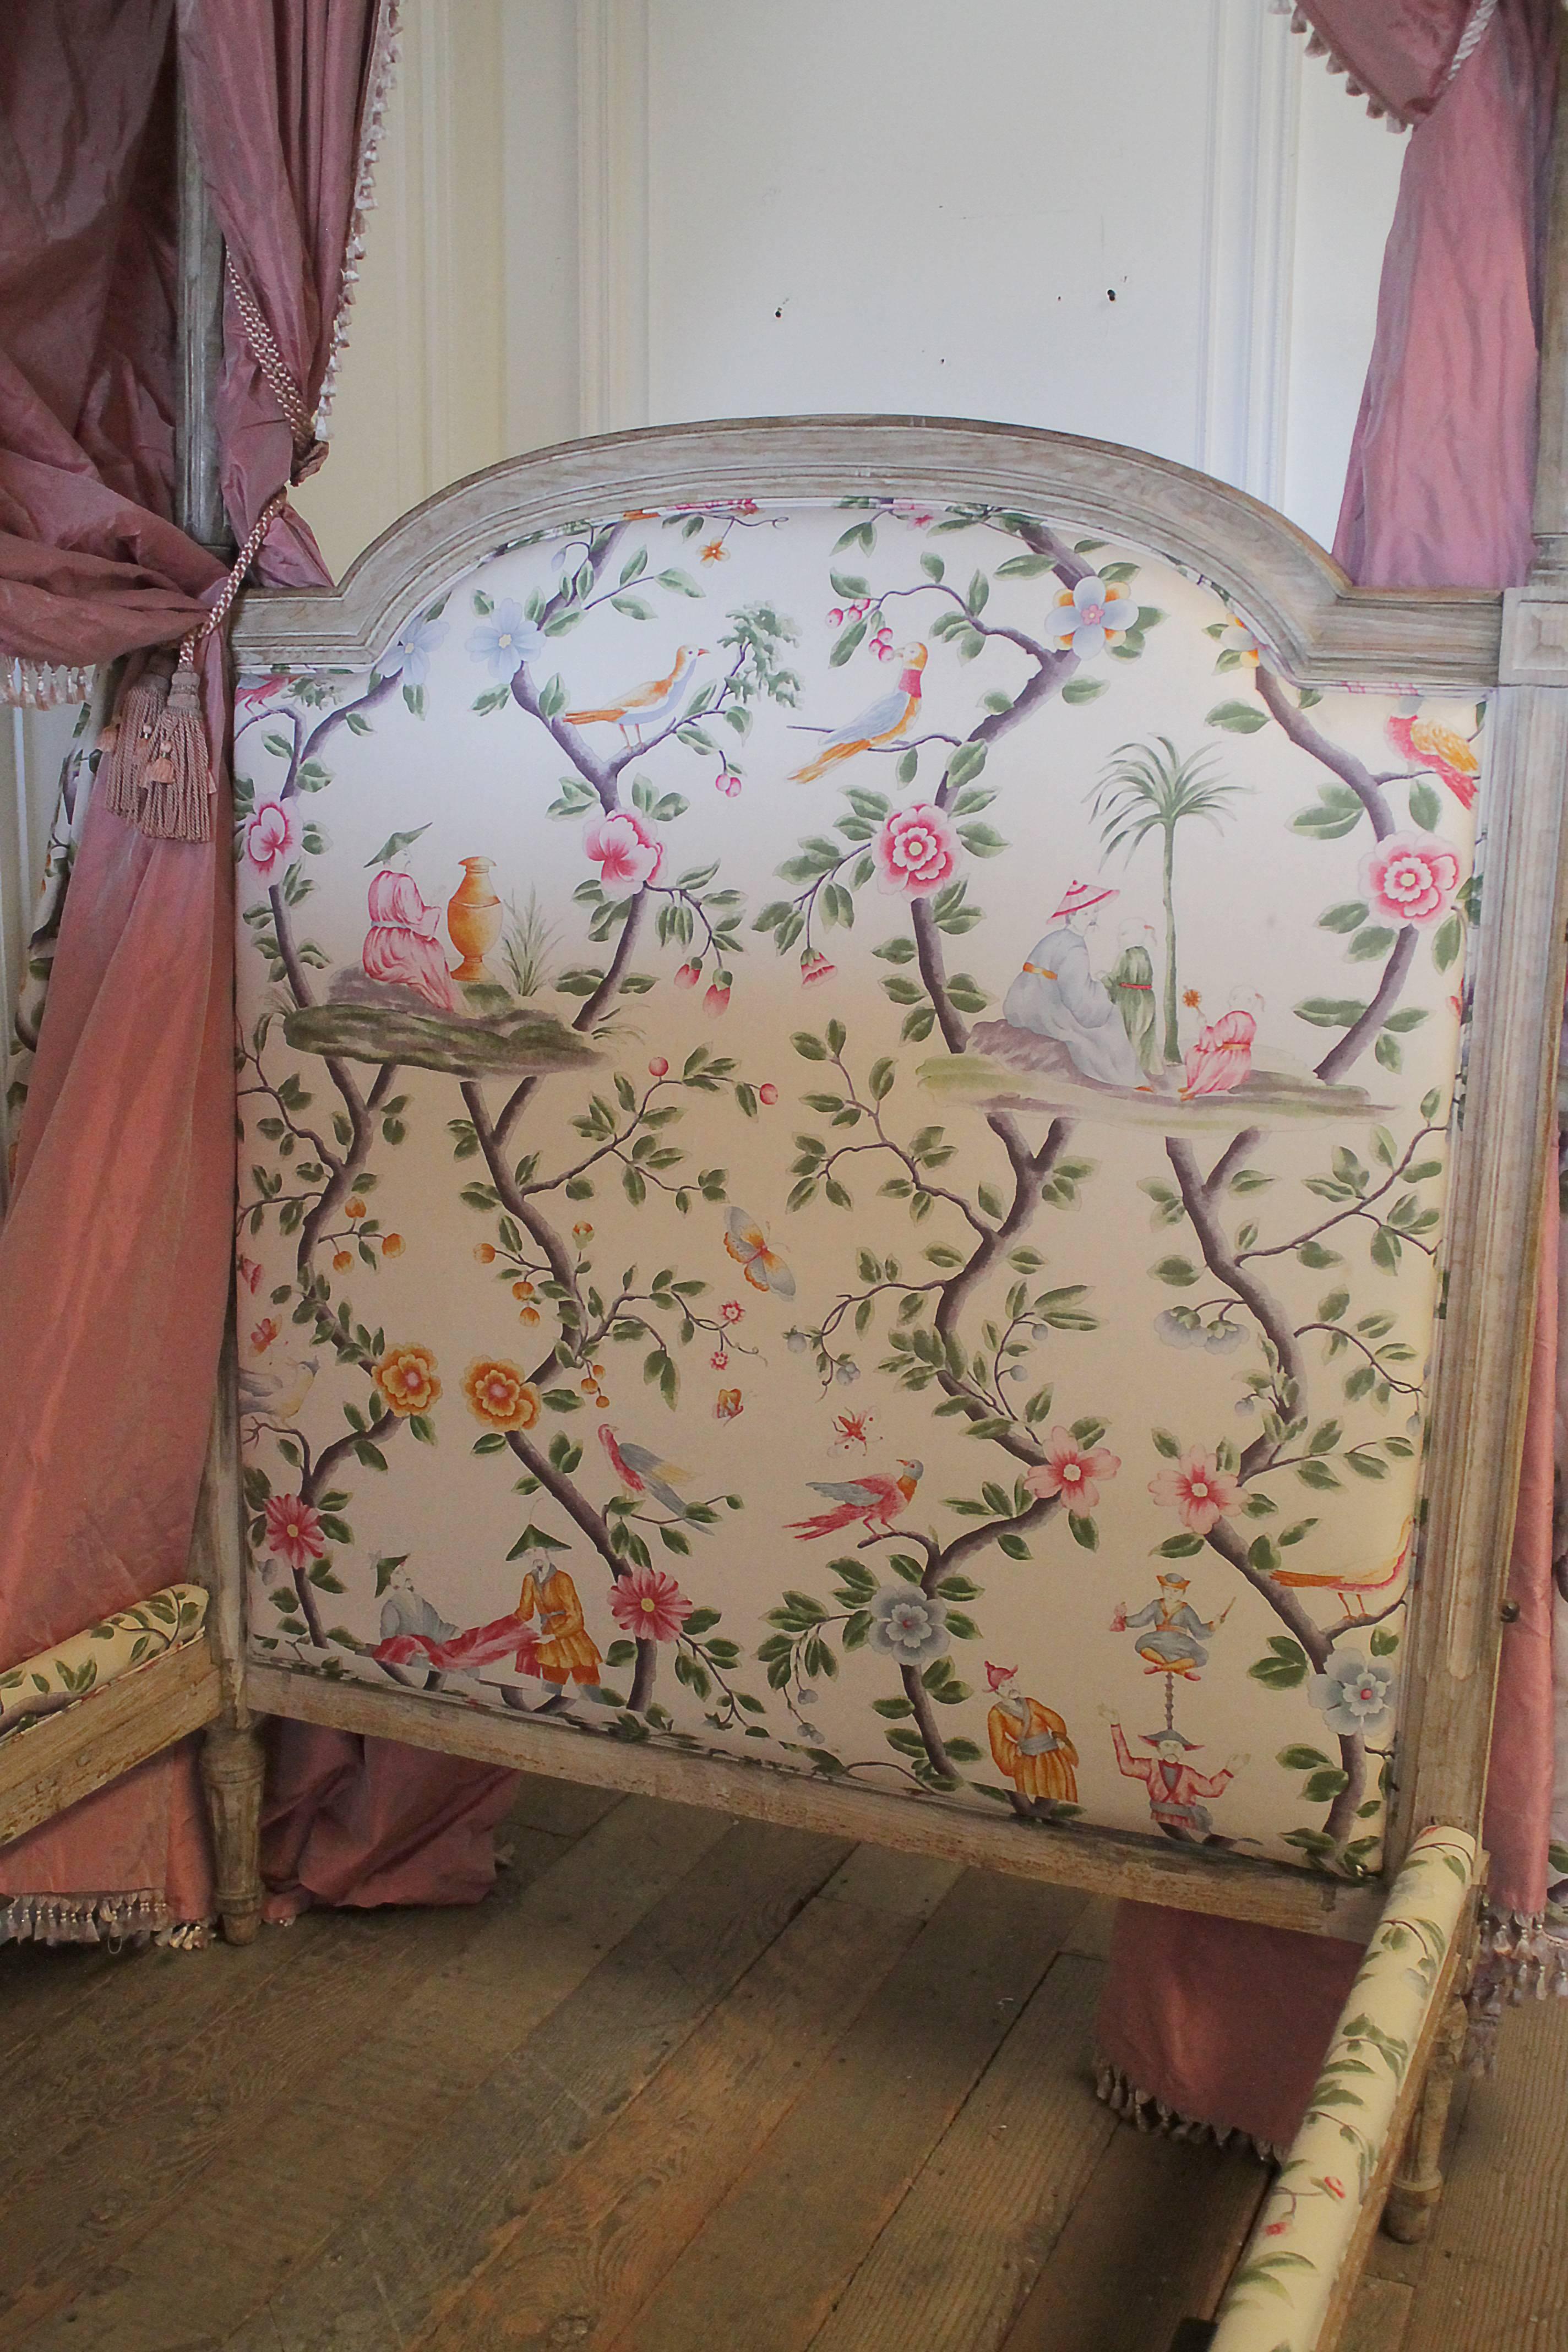 European 18th Century French Canopy Daybed with Toile Upholstery